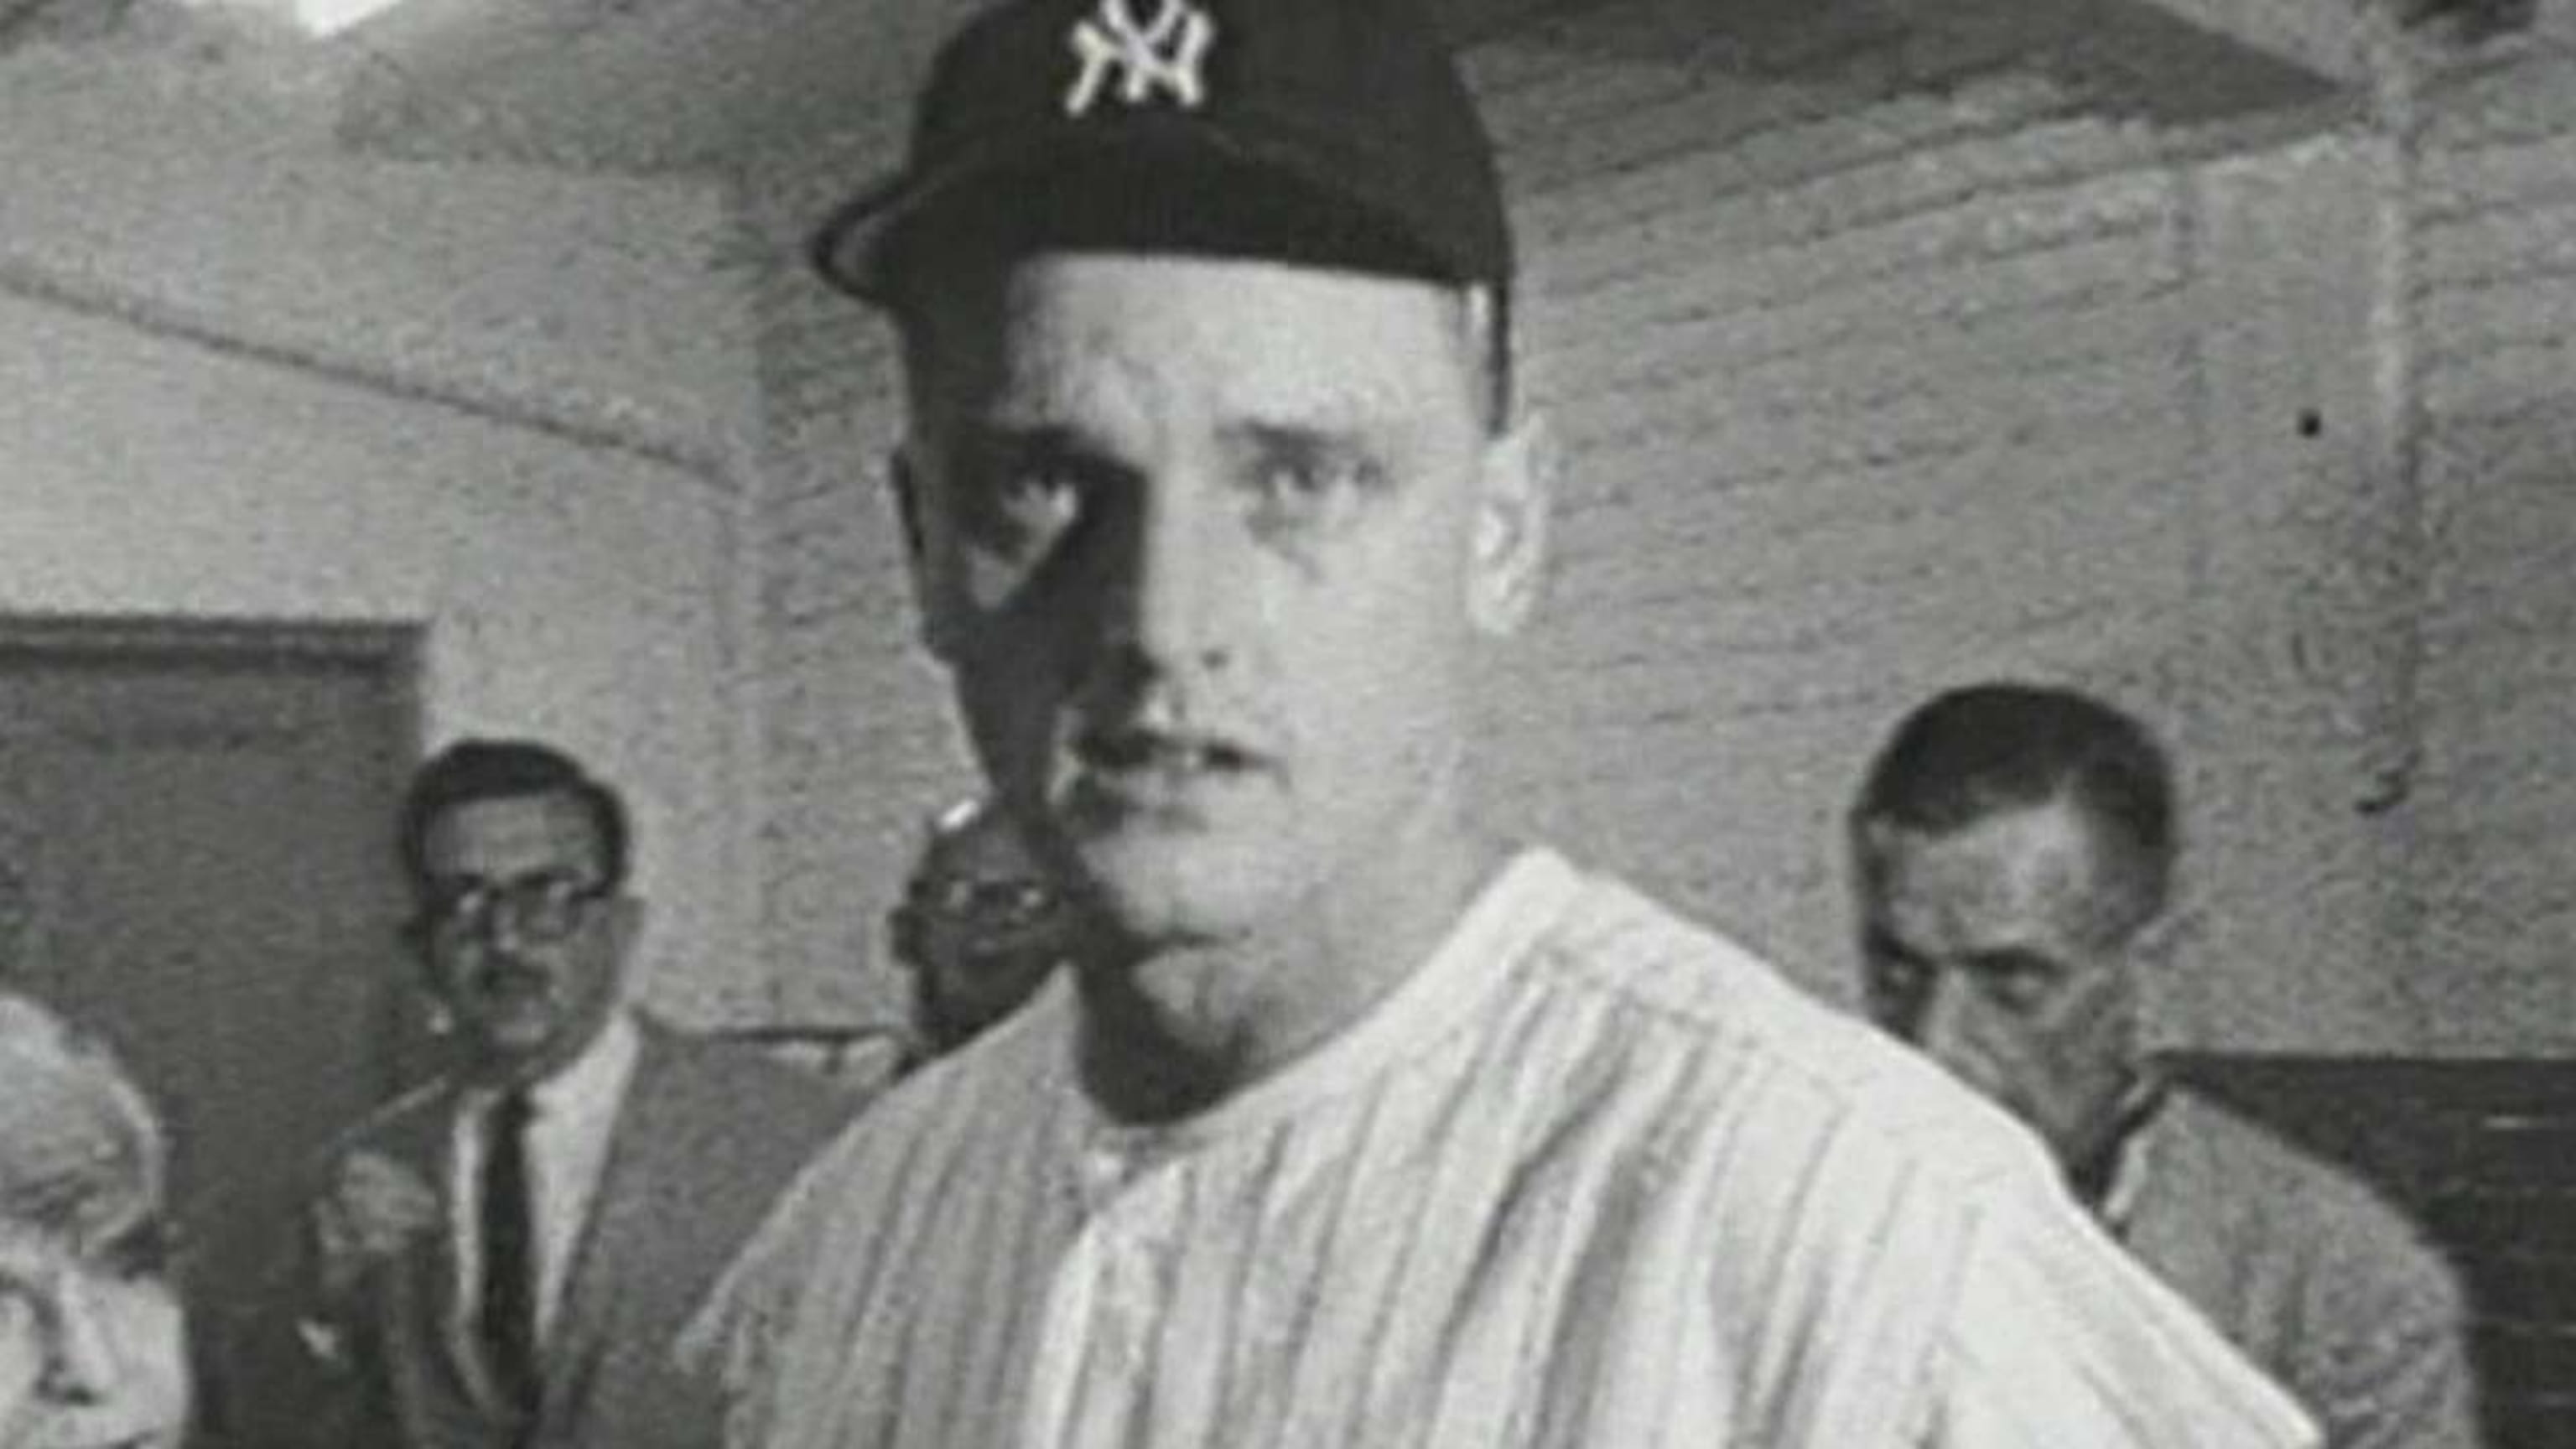 Remembering the life and career of Roger Maris – New York Daily News